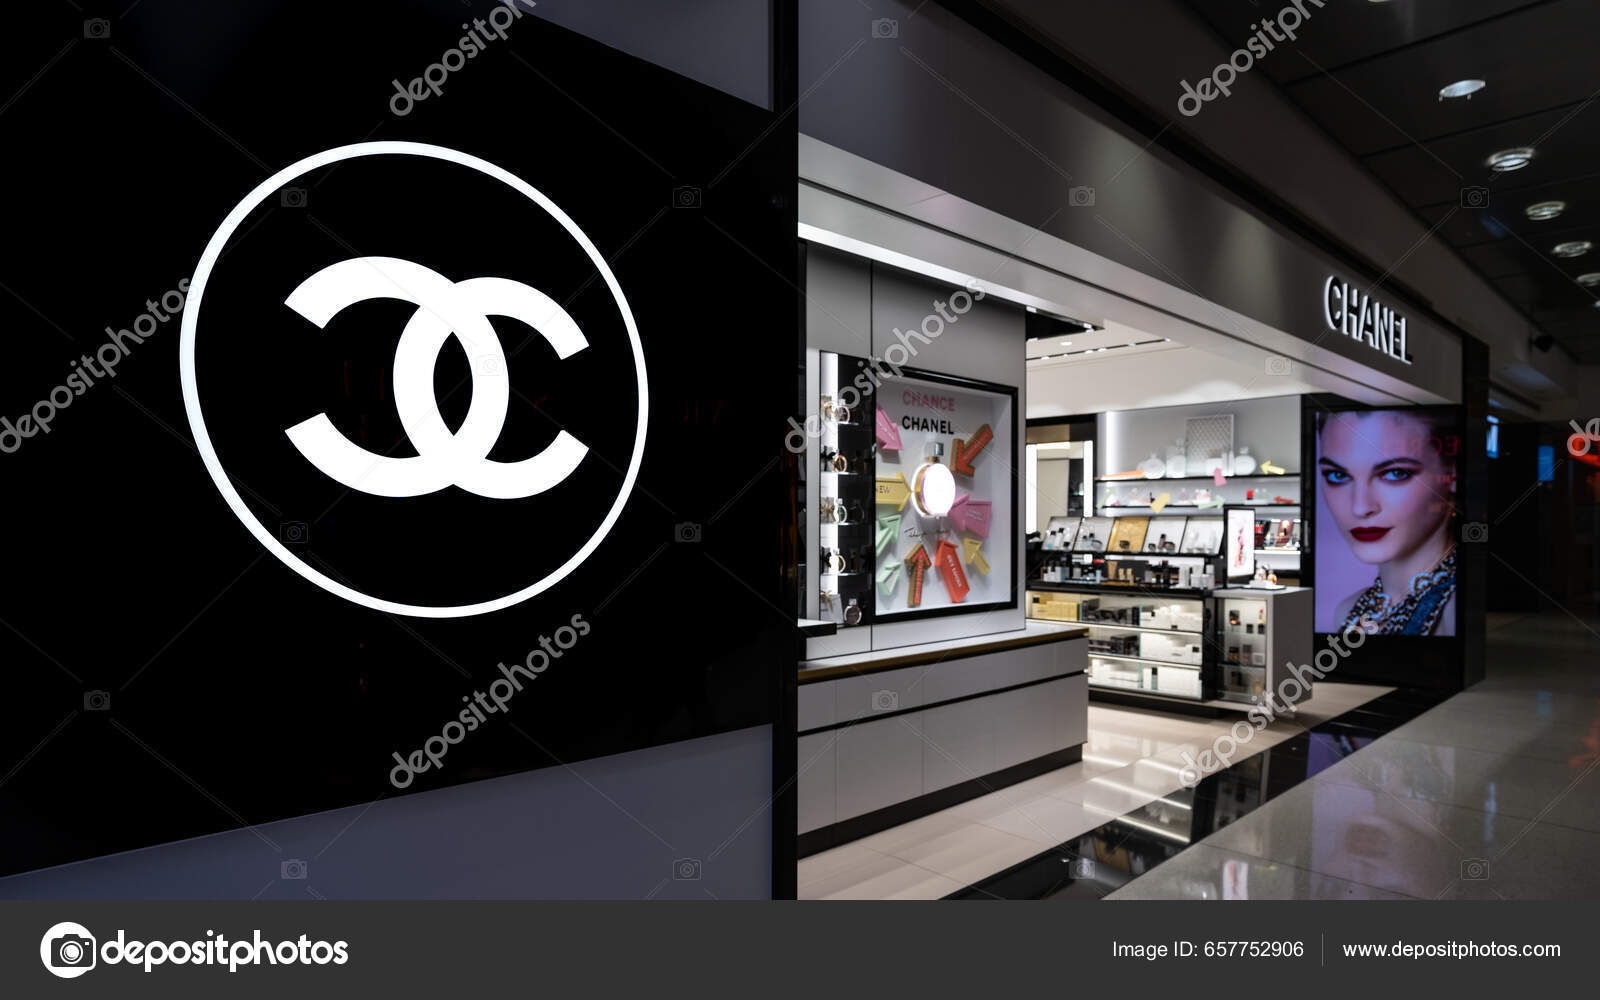 chanel department store